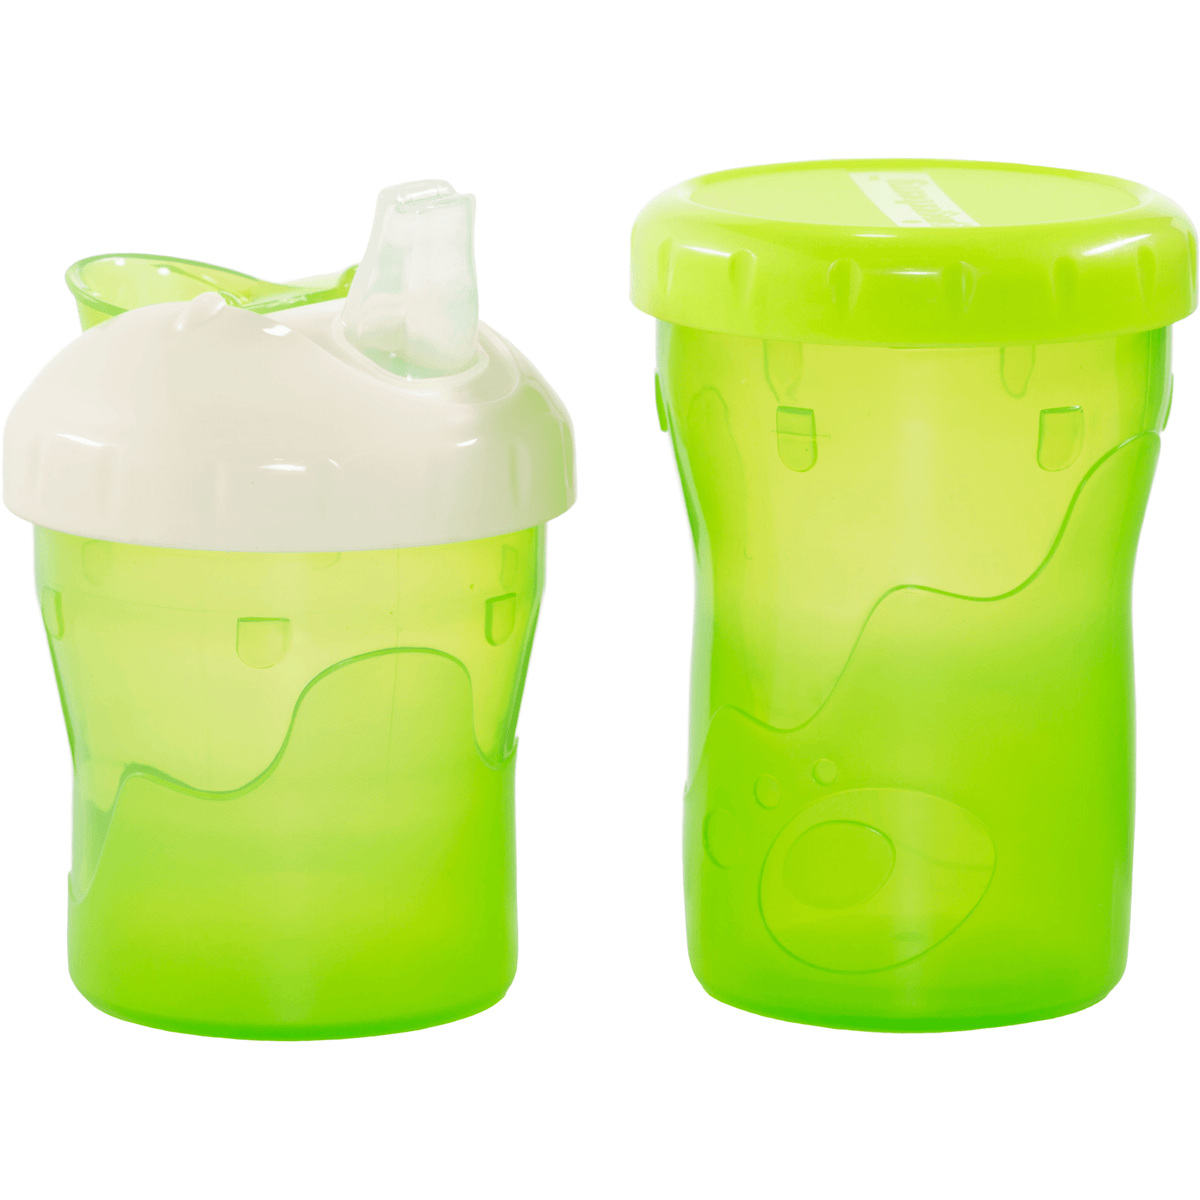 The Two Cup Set. Small mug with non-spill spout. Large snack container with lid. Green.